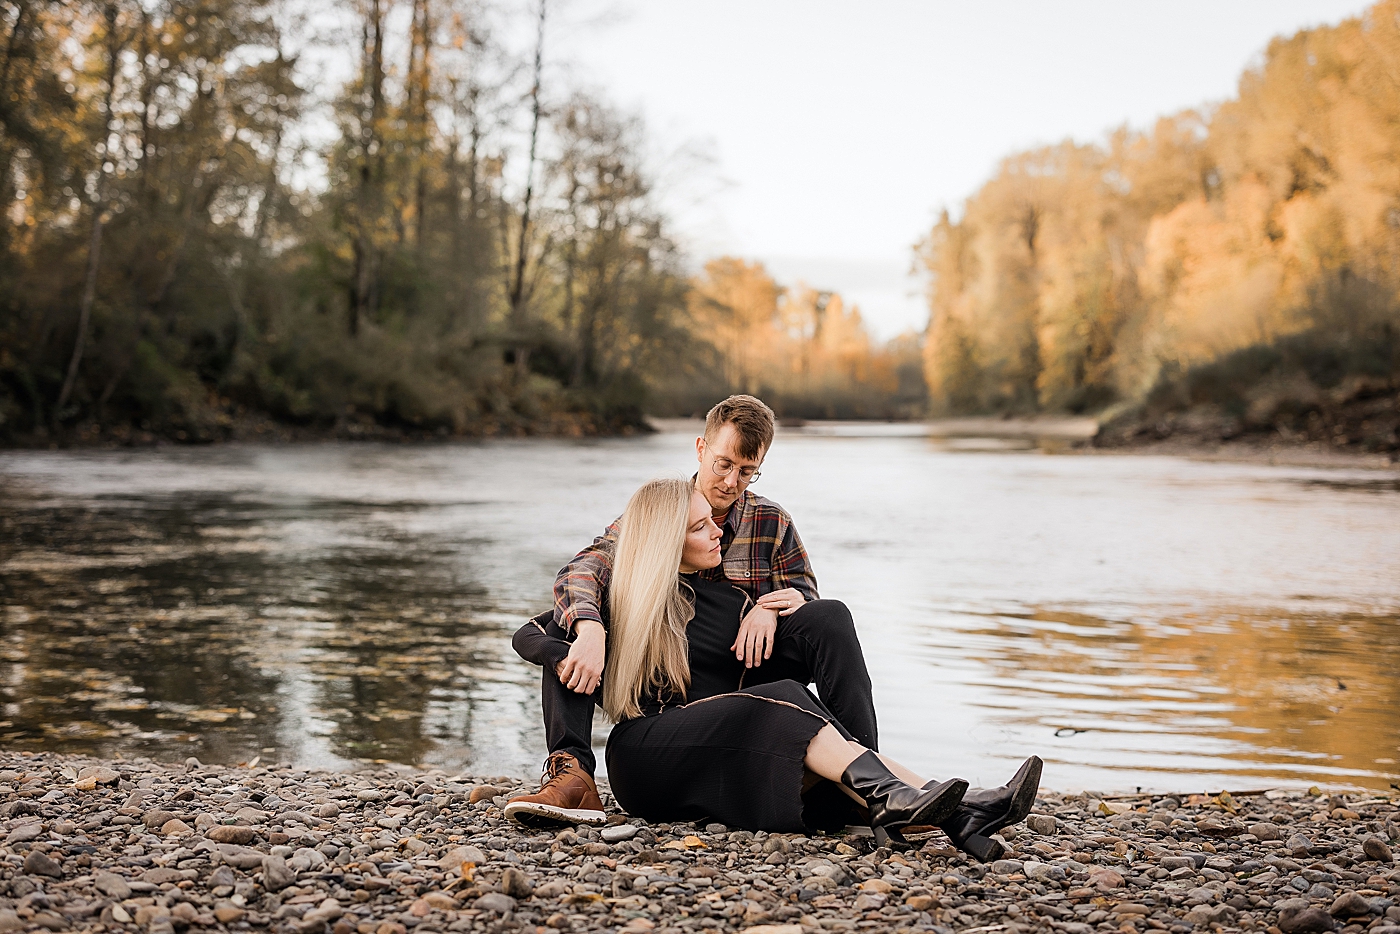 Fall engagement session in North Bend, WA. Photo by Megan Montalvo Photography.